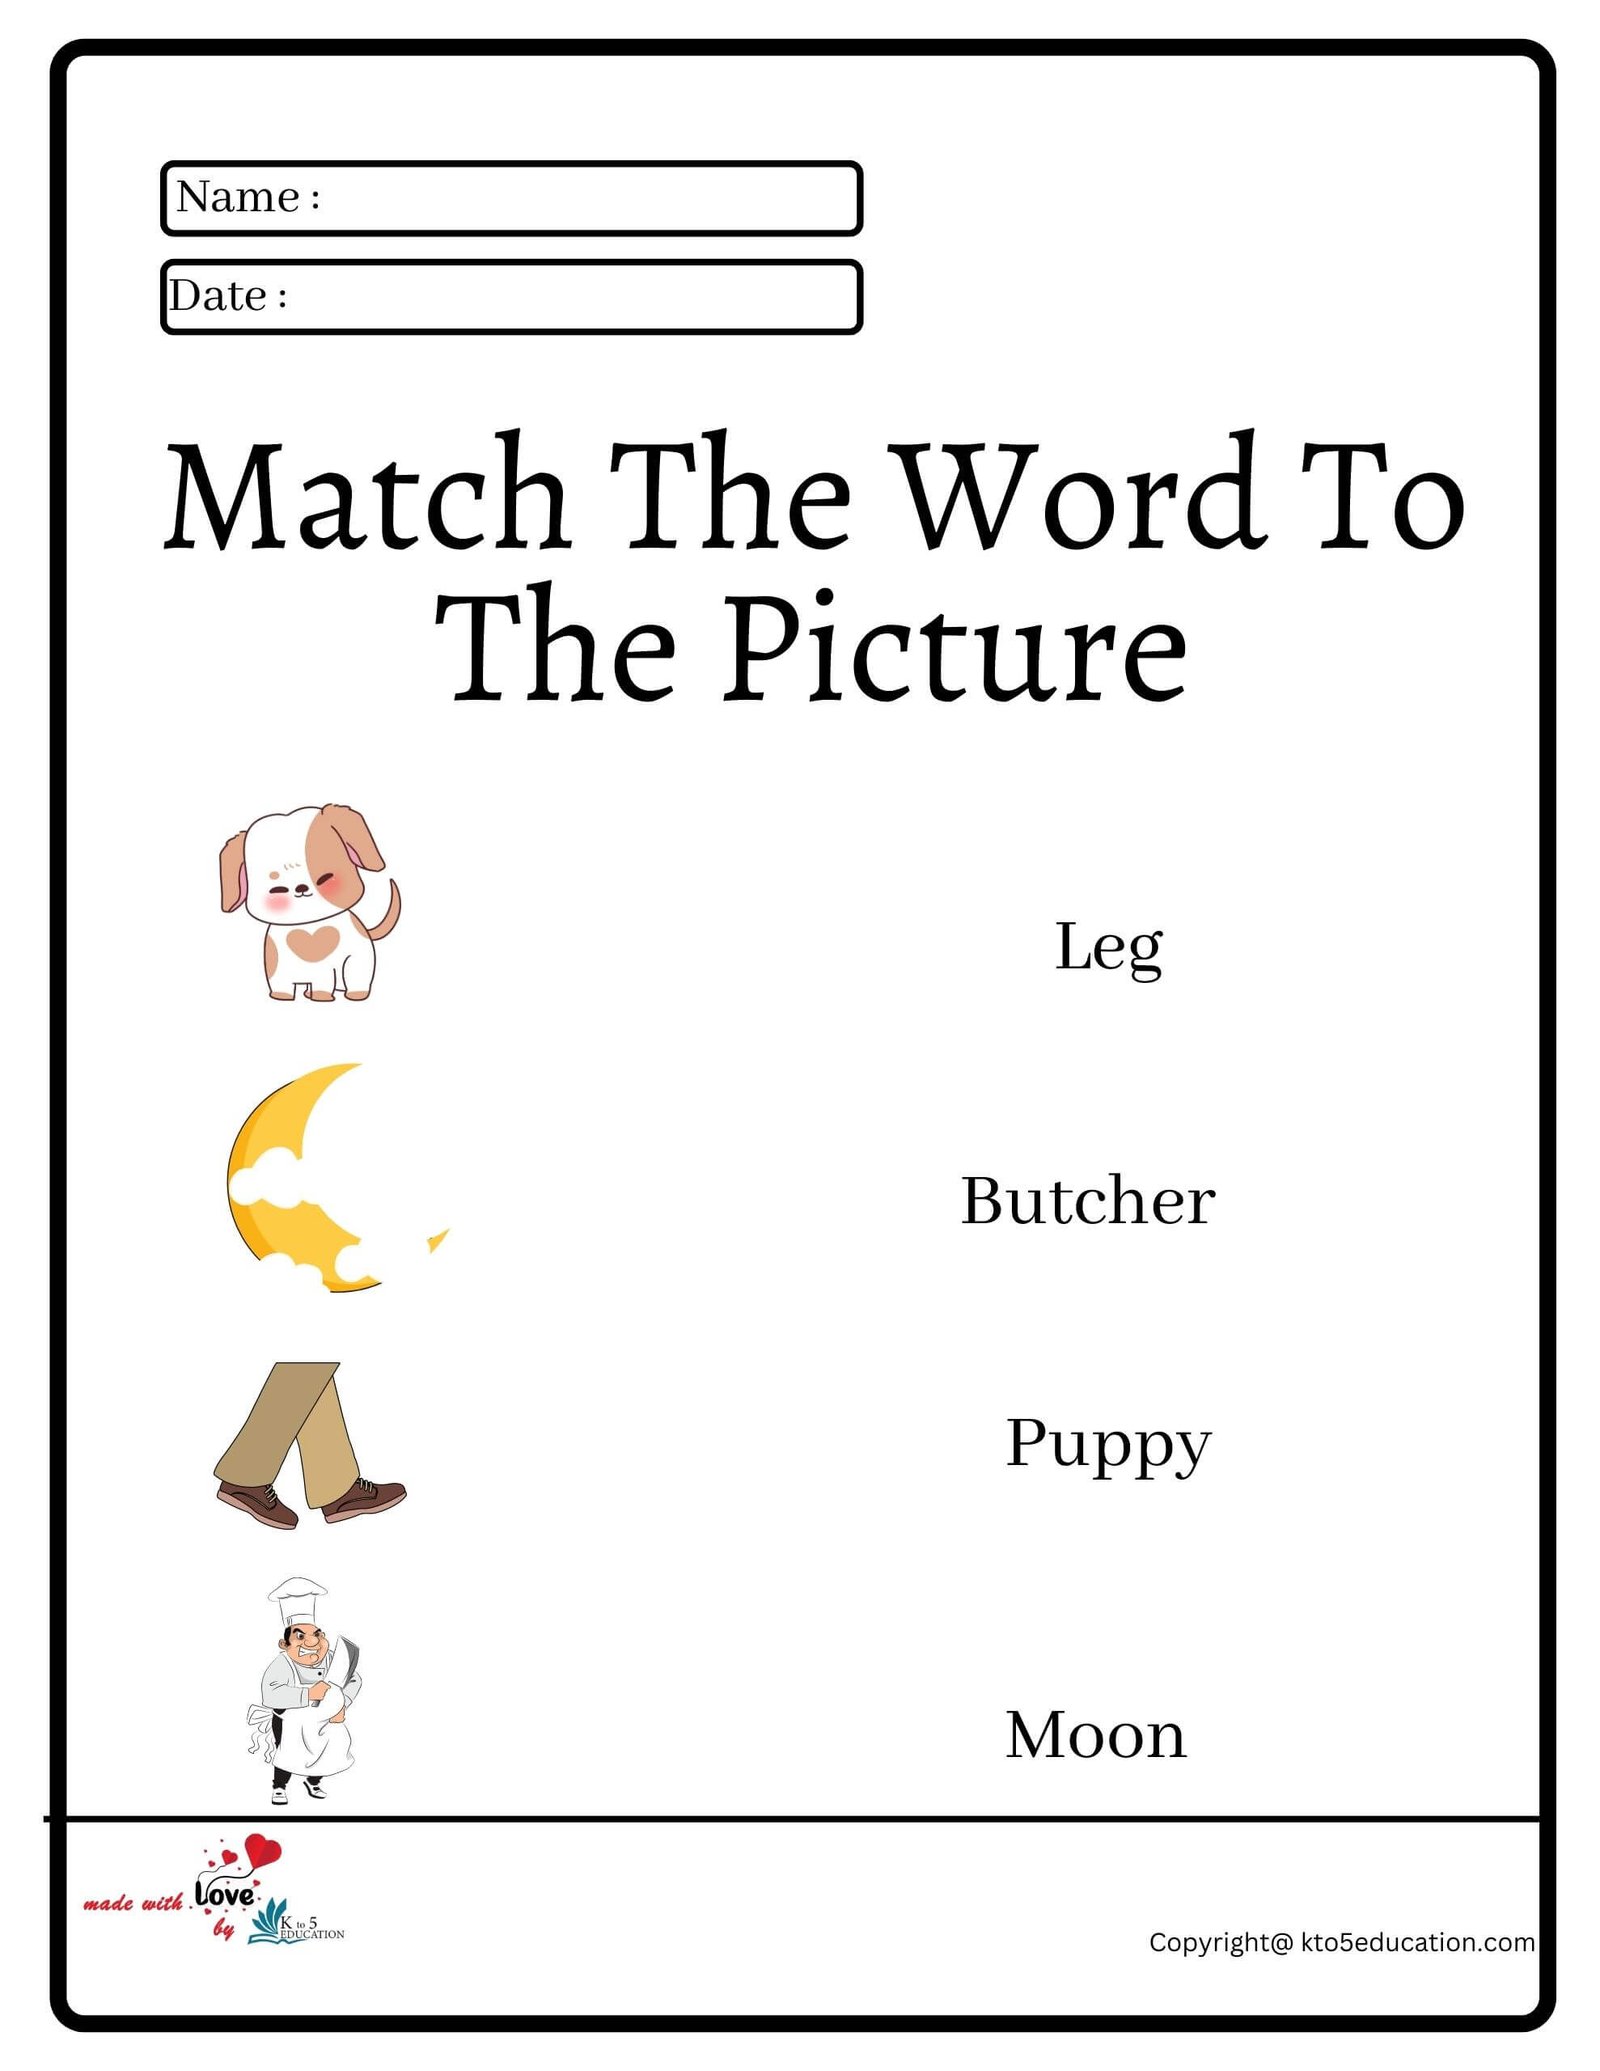 Match The Word To The Picture Worksheet 2